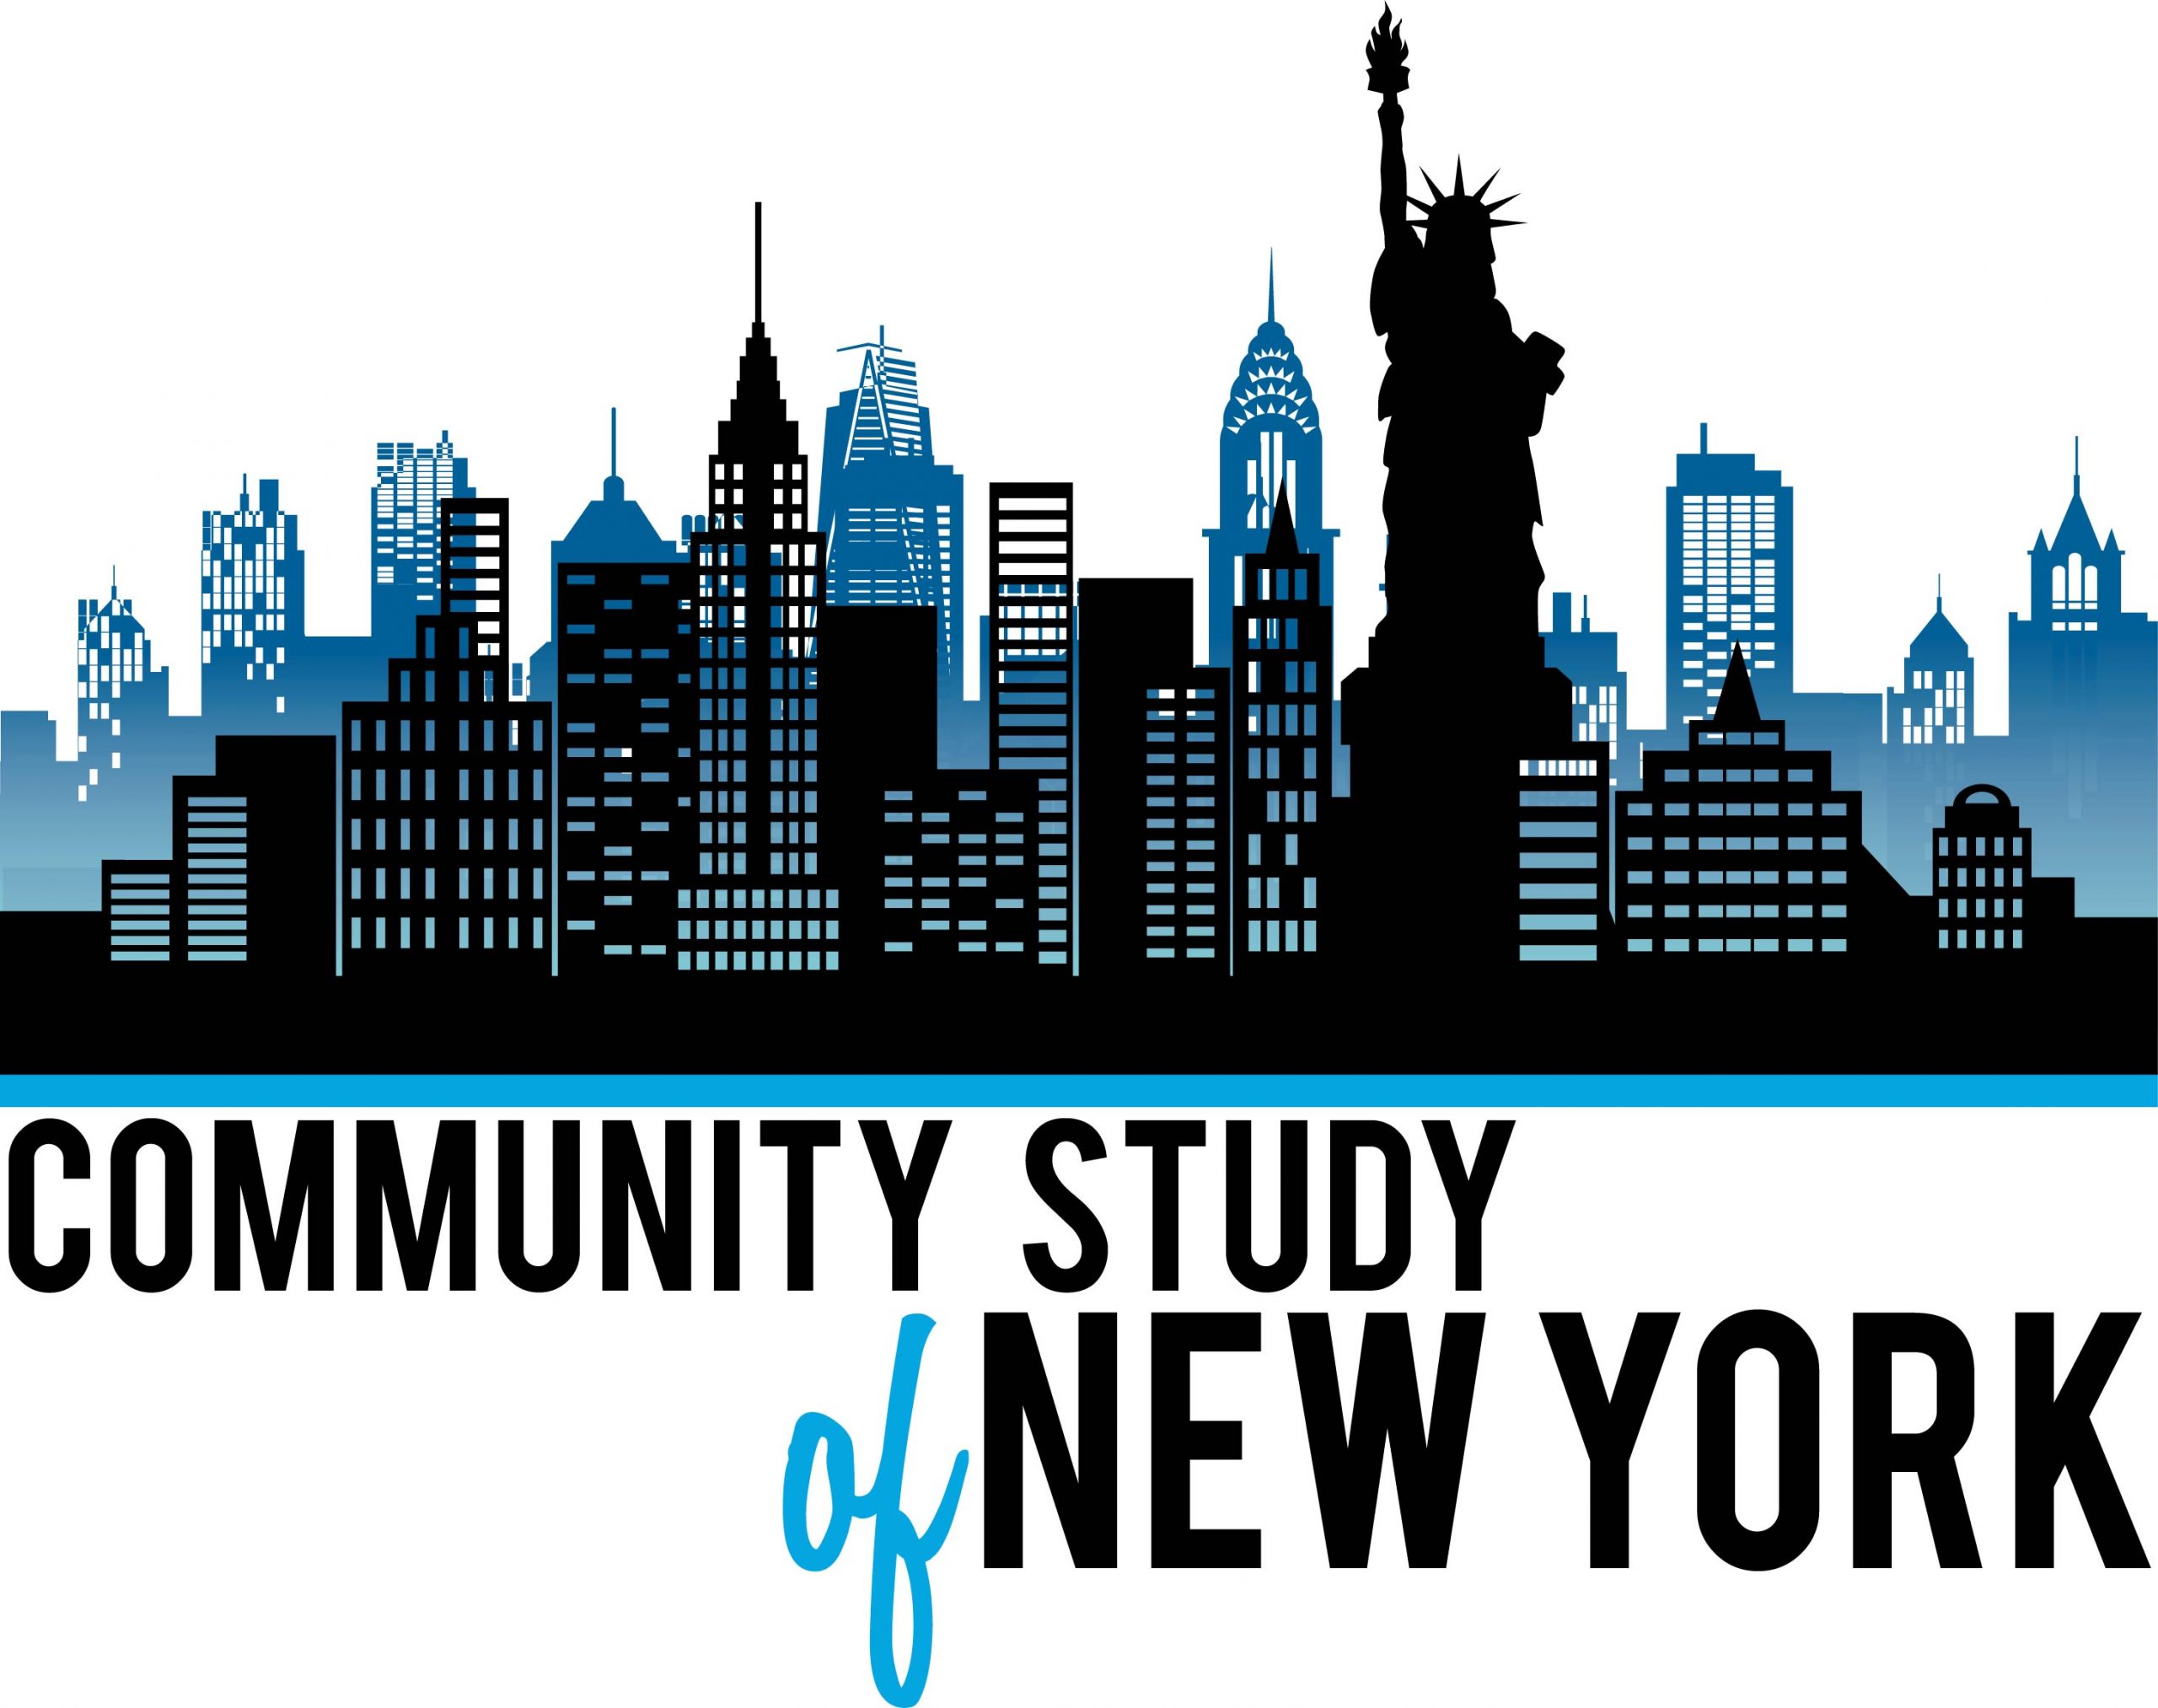 The Community Study of New York Frequently Asked Questions SSRS